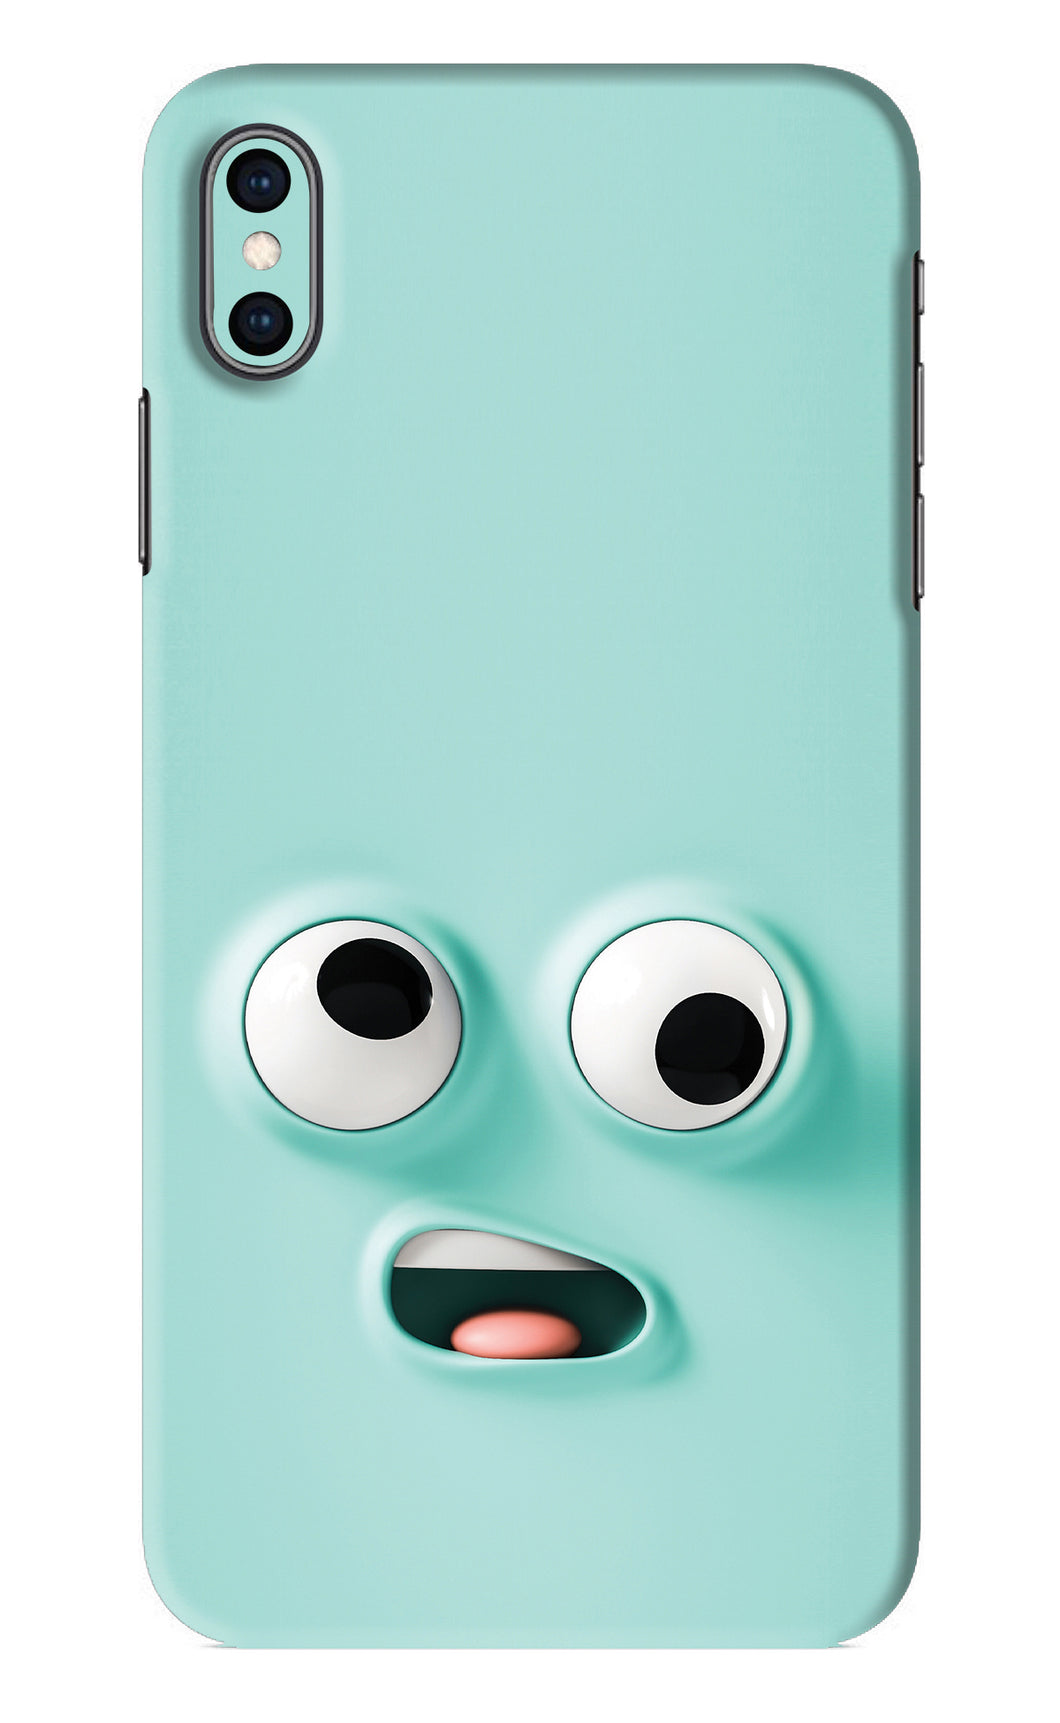 Silly Face Cartoon iPhone XS Max Back Skin Wrap